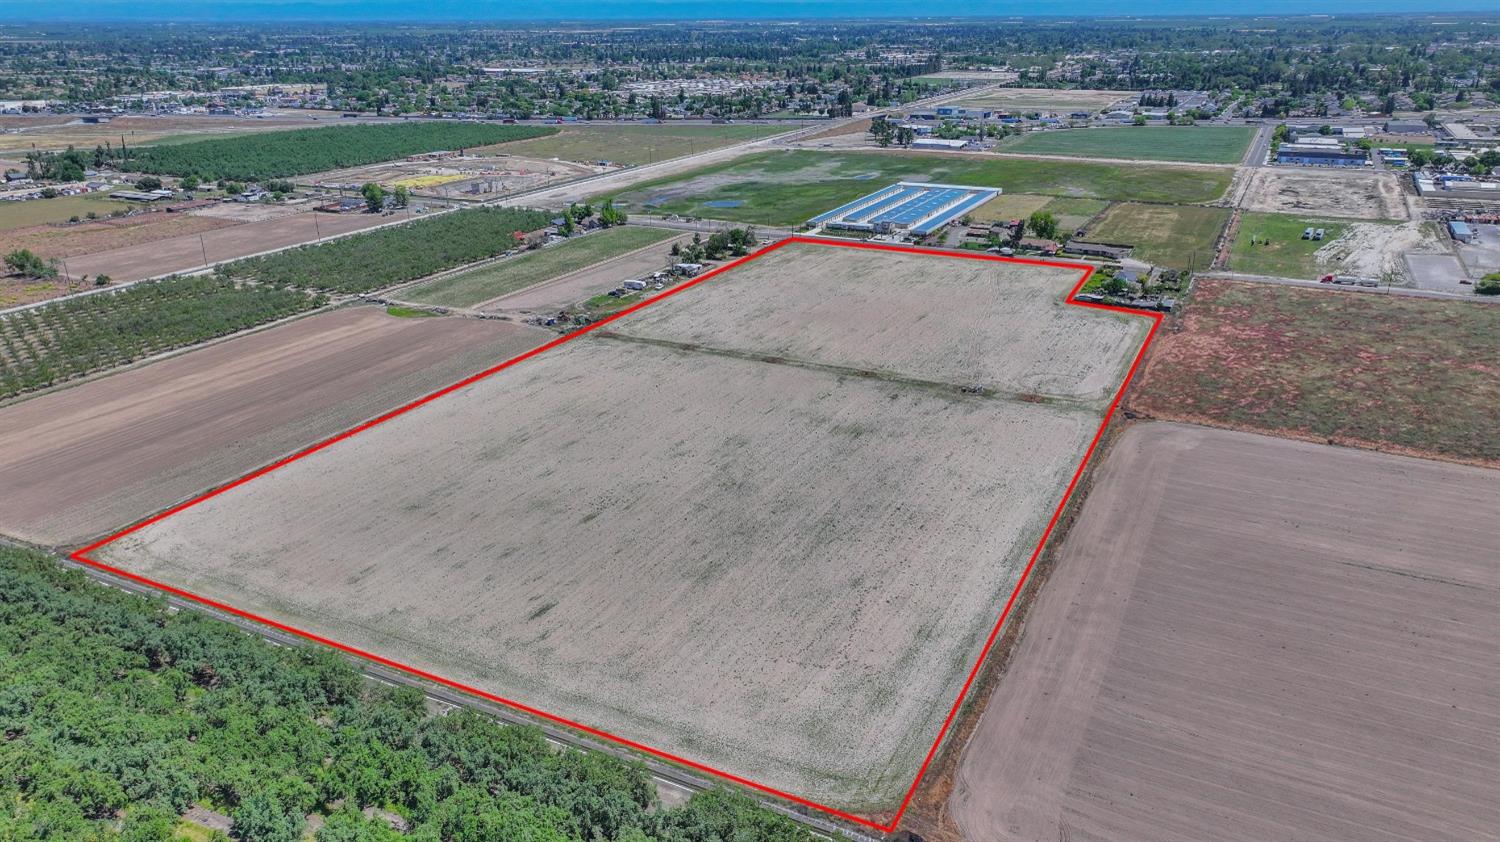 Approx. 20 Acres of industrial land near two Hwy. 99 interchanges (Fulkerth Road and W. Main Street) in the Turlock Industrial Park.